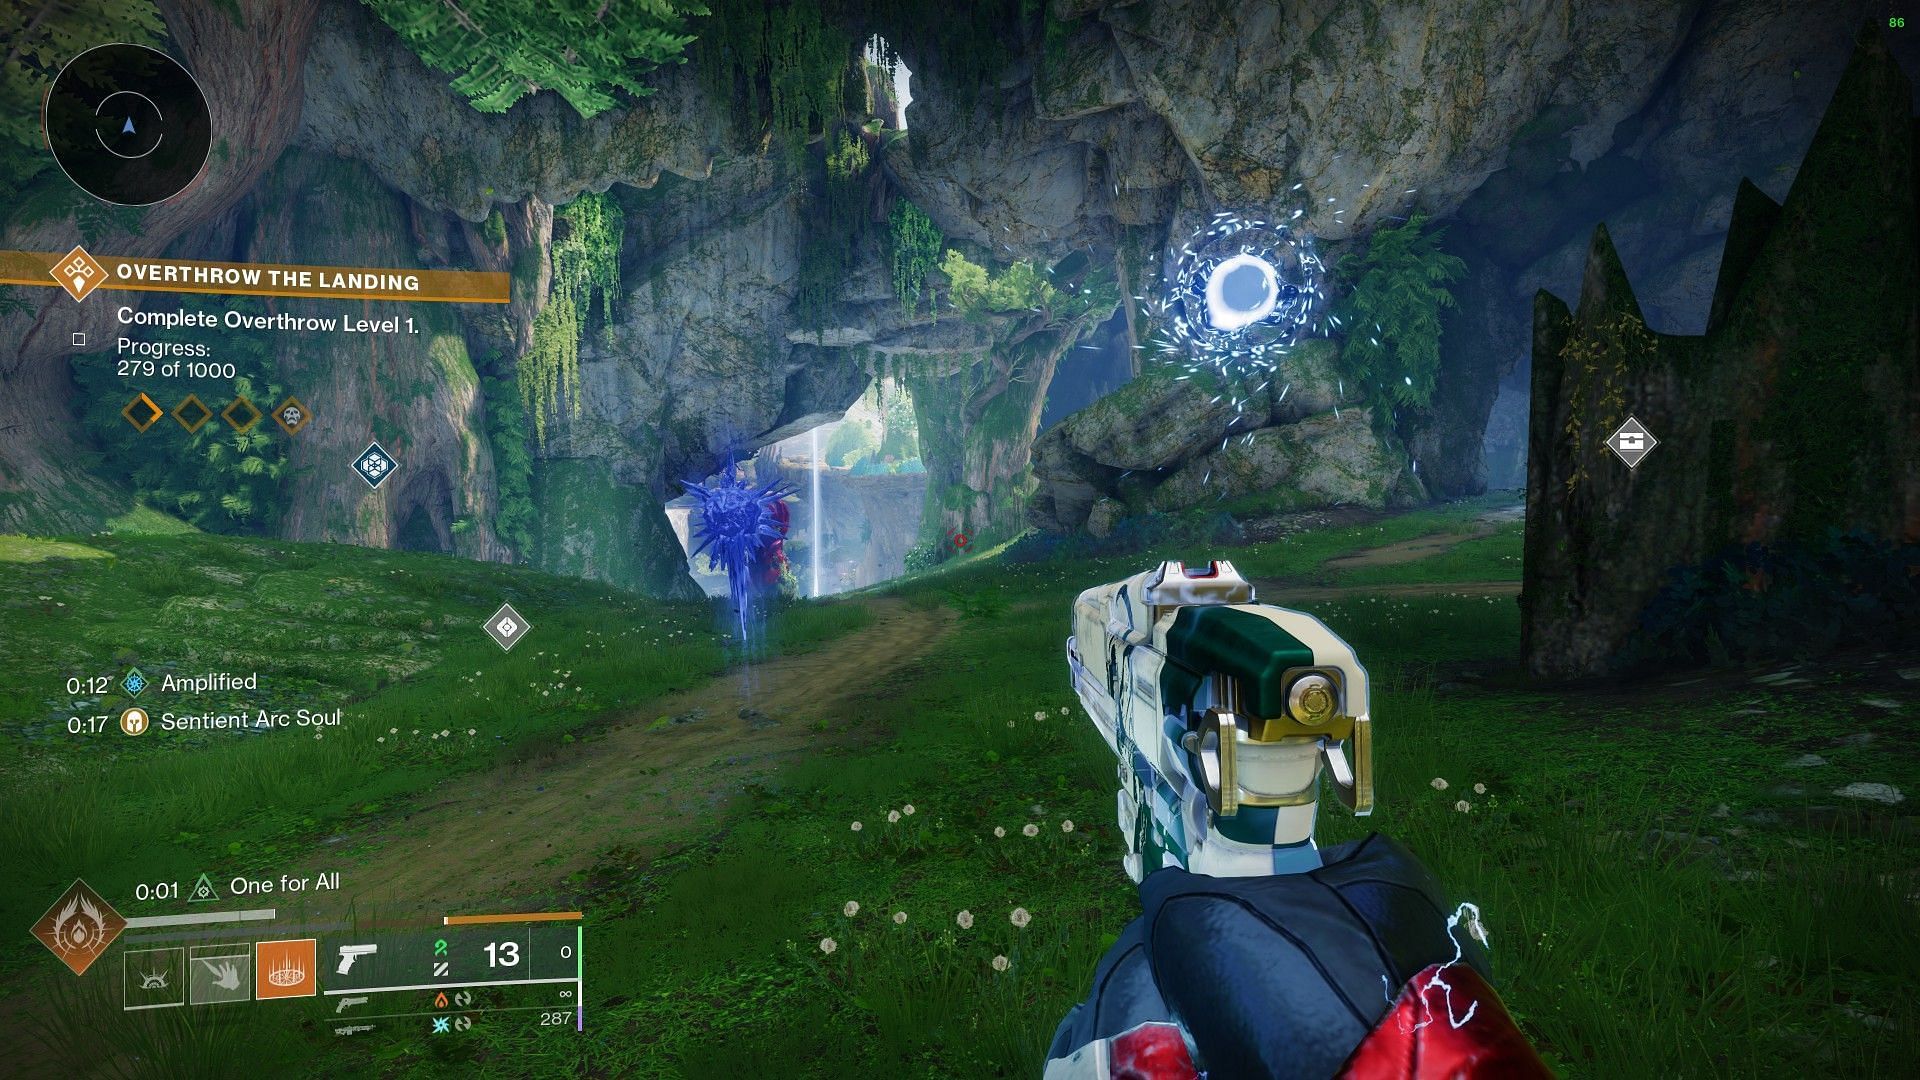 Arc Soul and Stasis Turret at the same time in Destiny 2 (Image via Bungie)